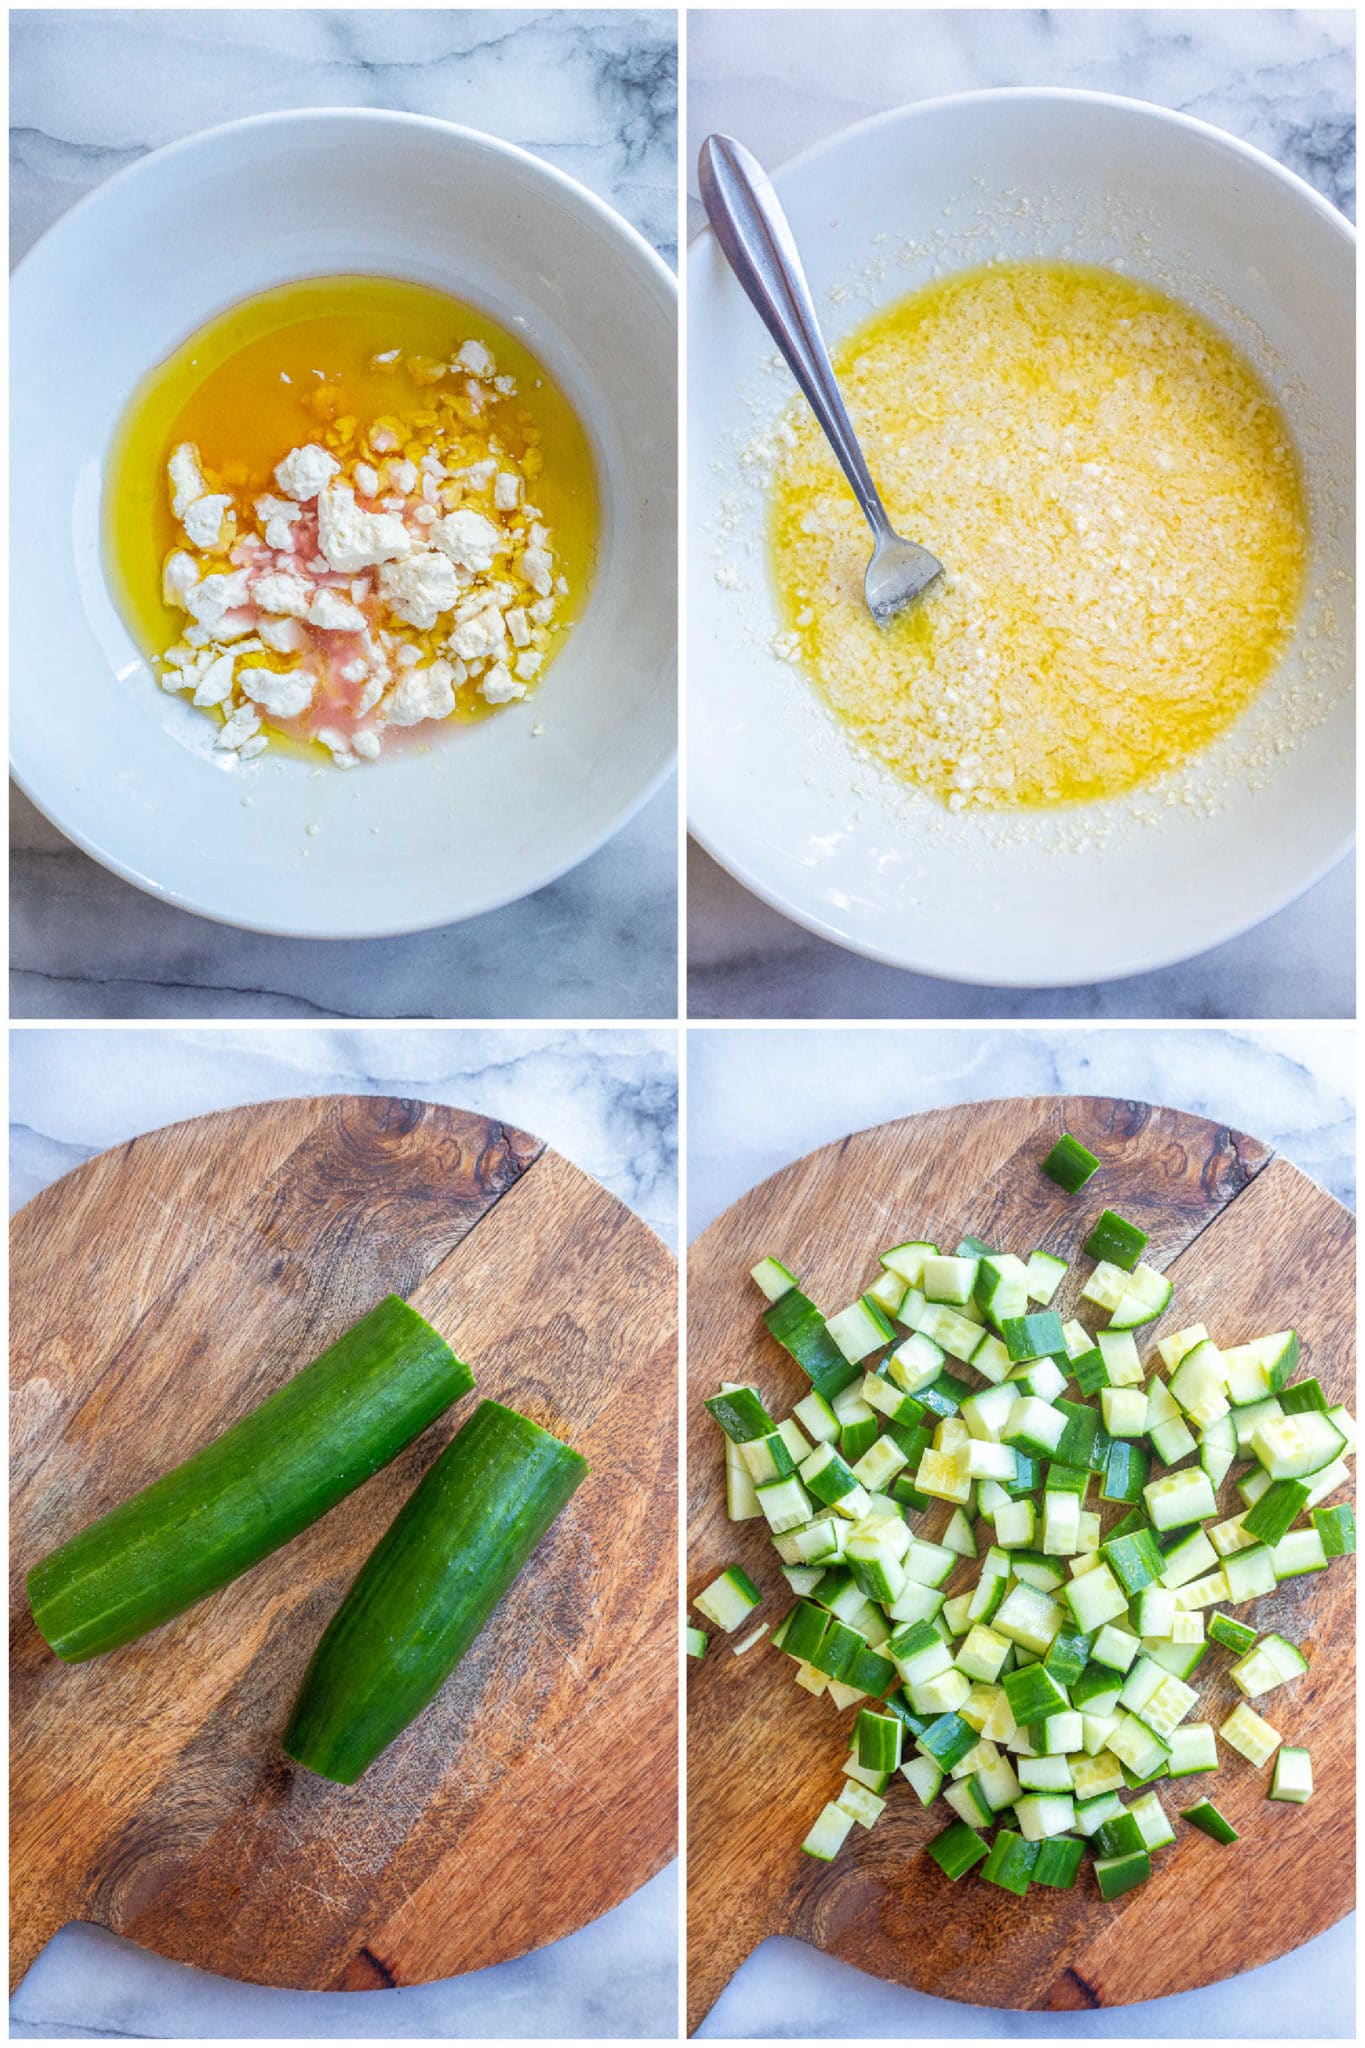 showing how to make the lemon feta dressing and dice up the cucumbers